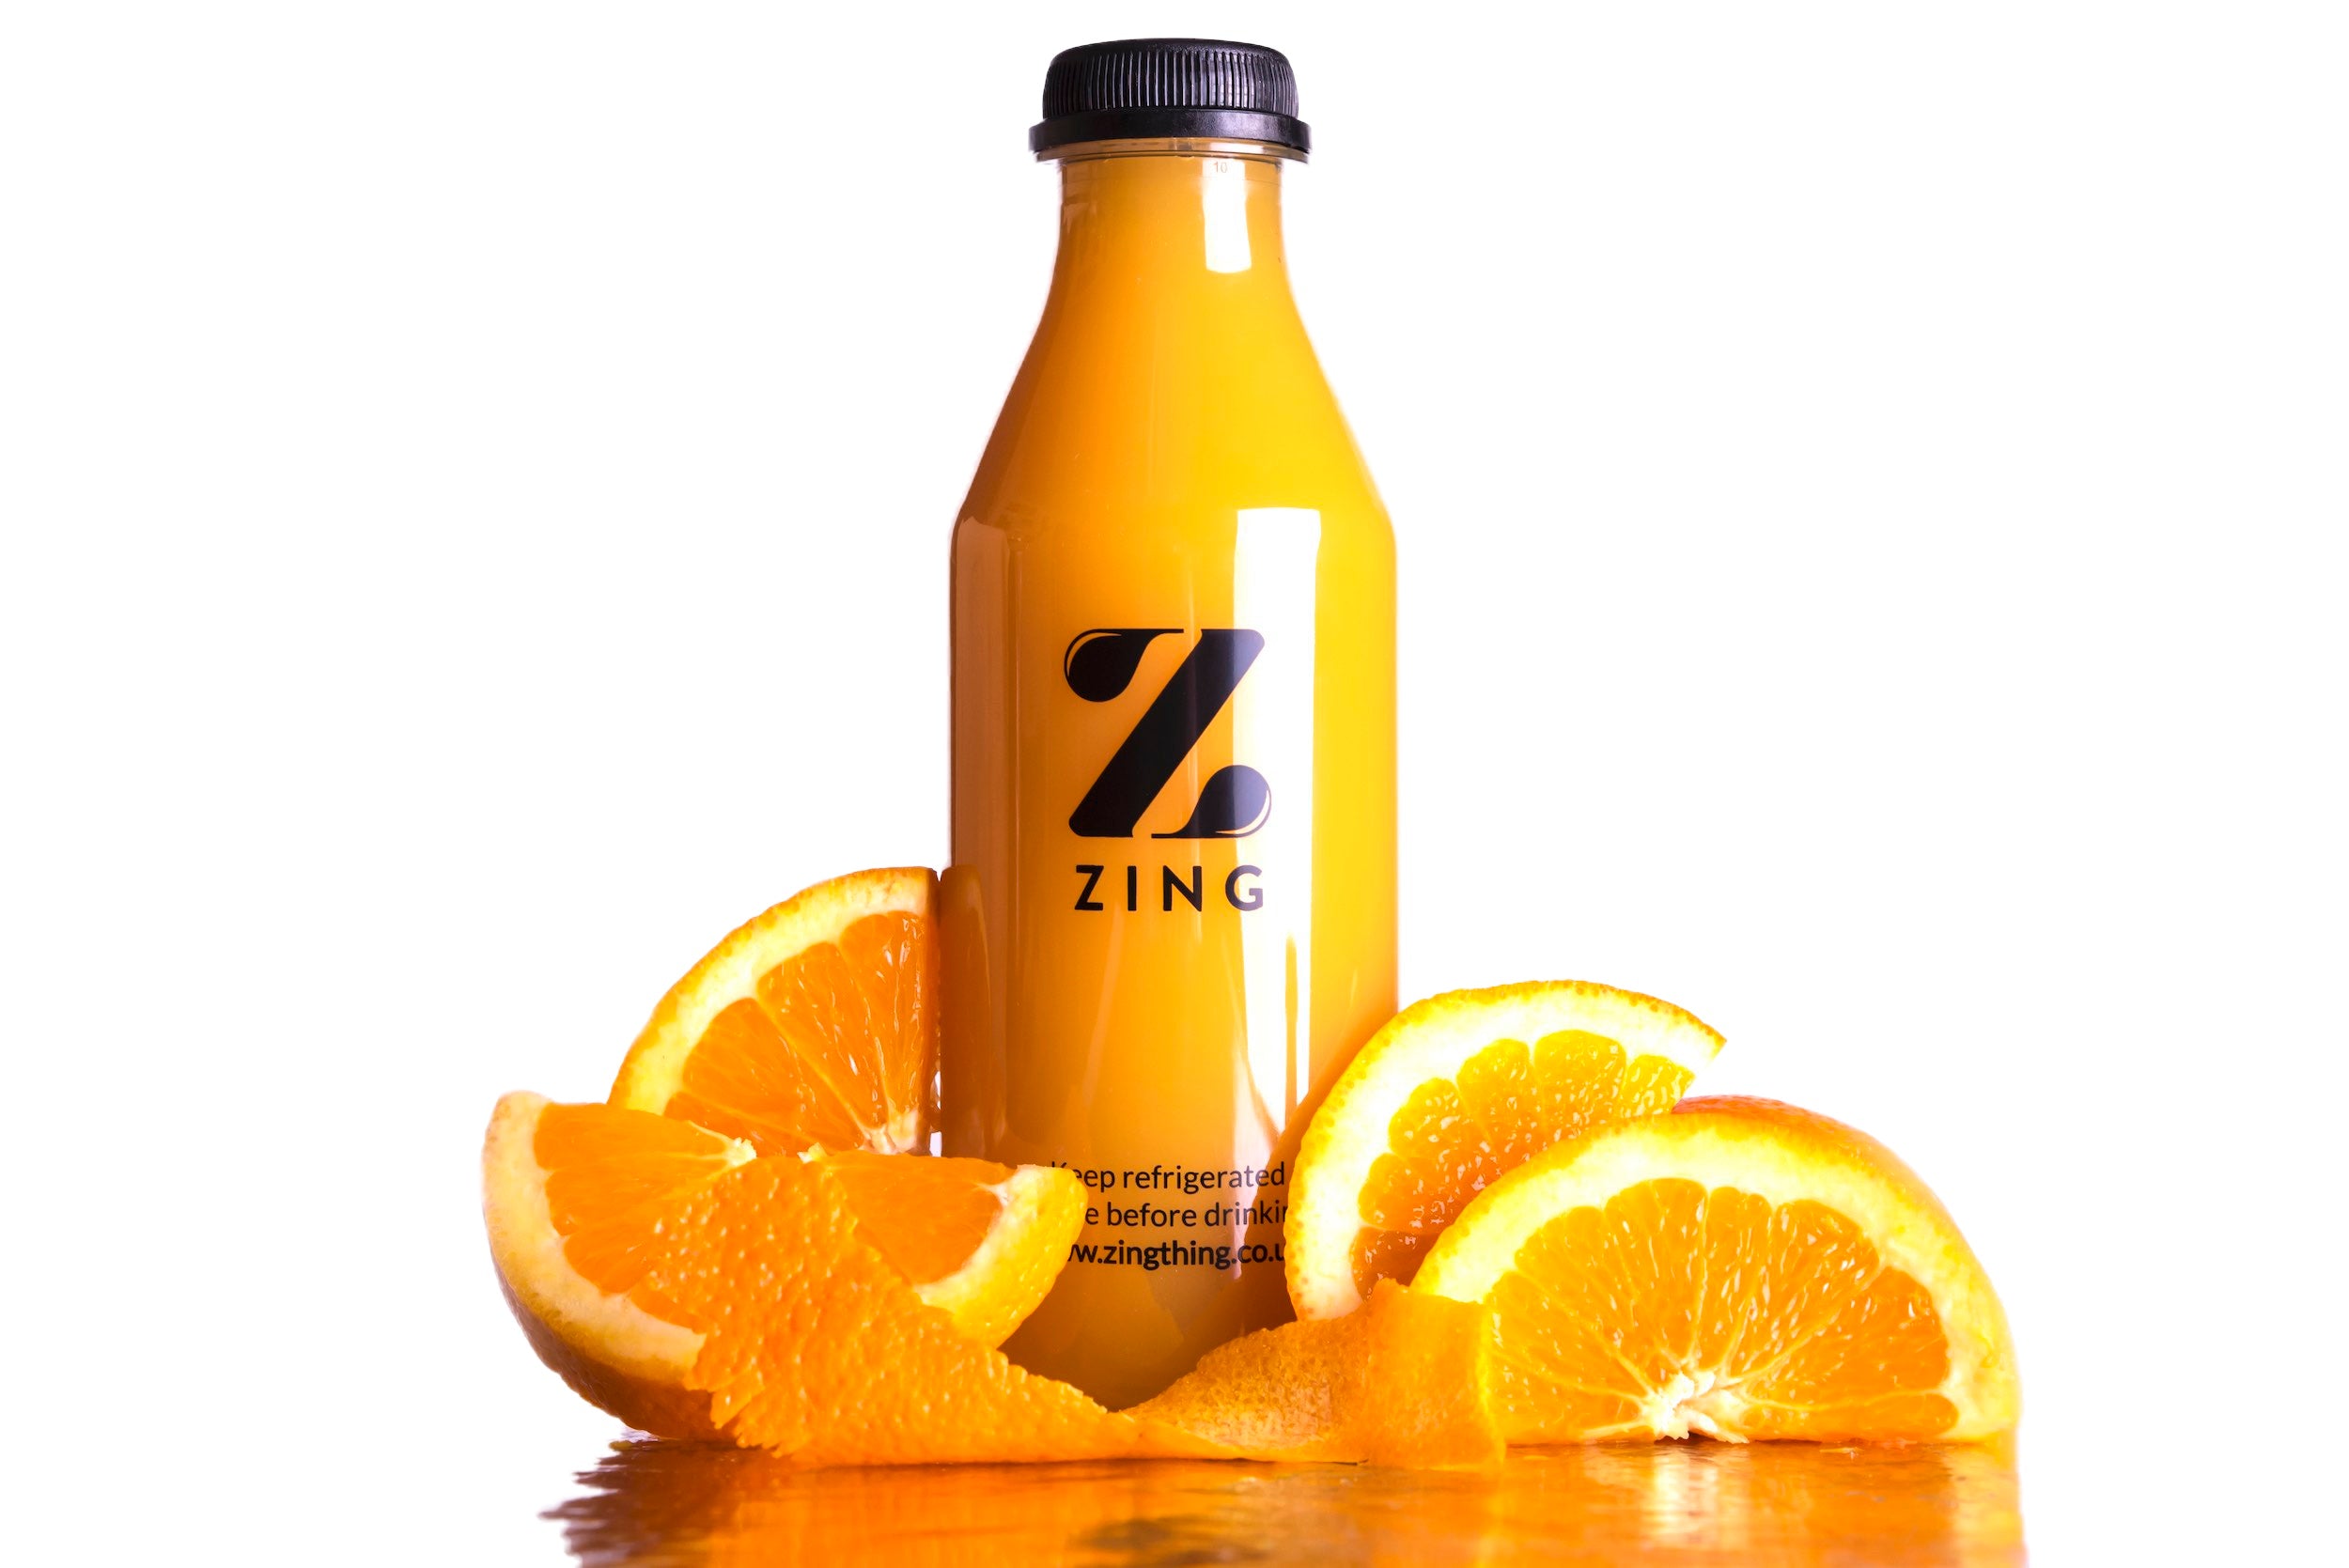 A beverage made with oranges and a printed on label